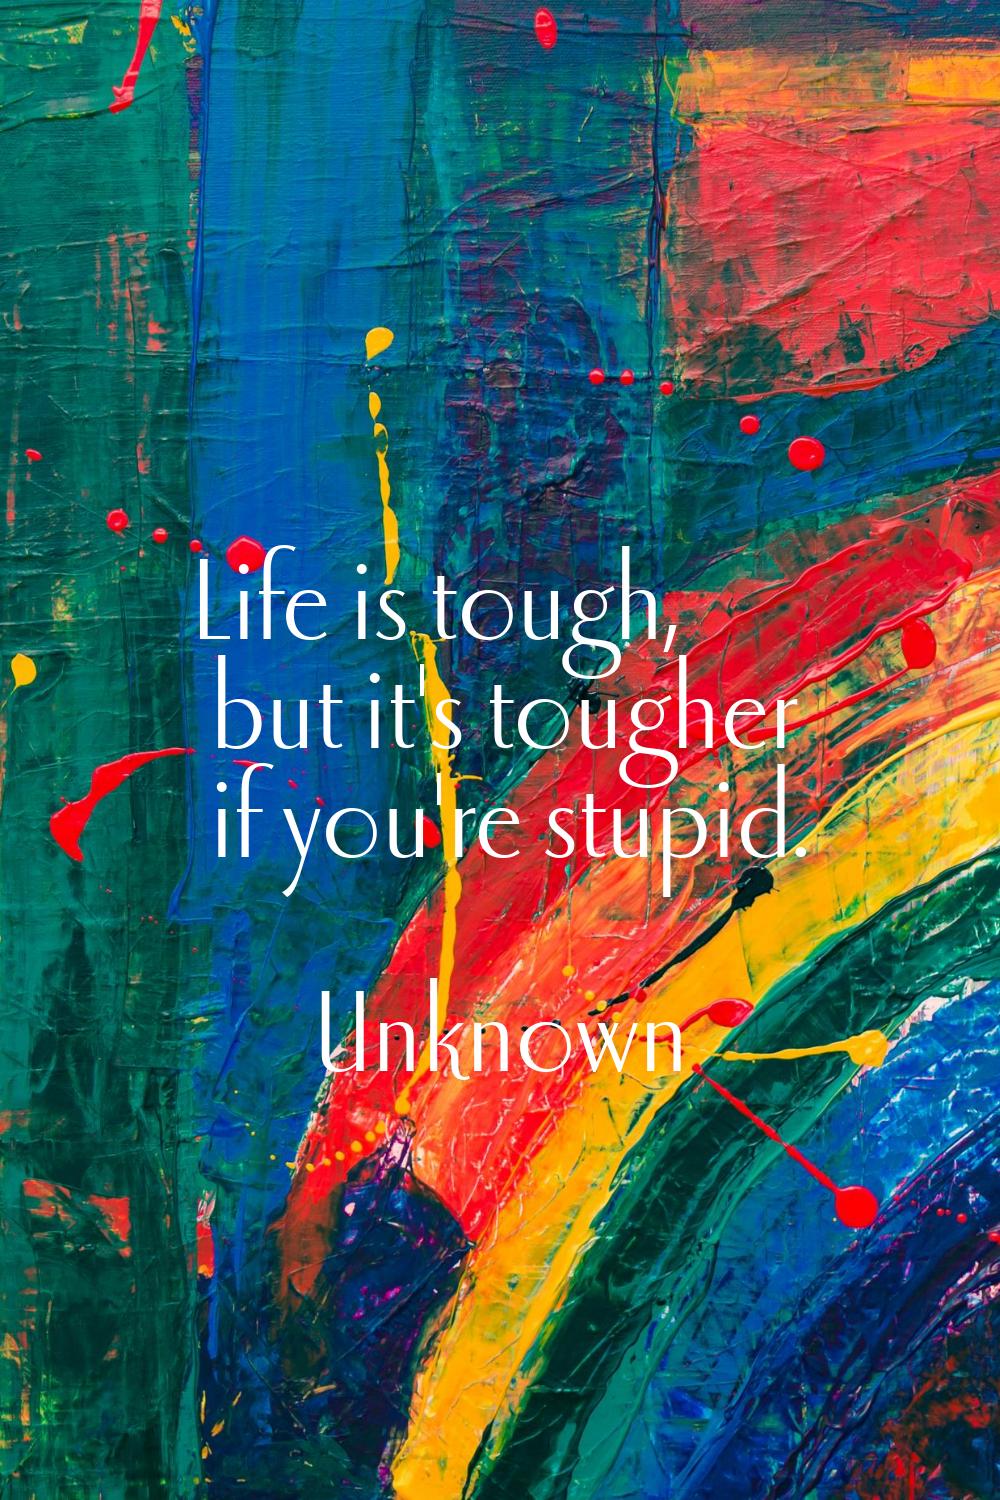 Life is tough, but it's tougher if you're stupid.